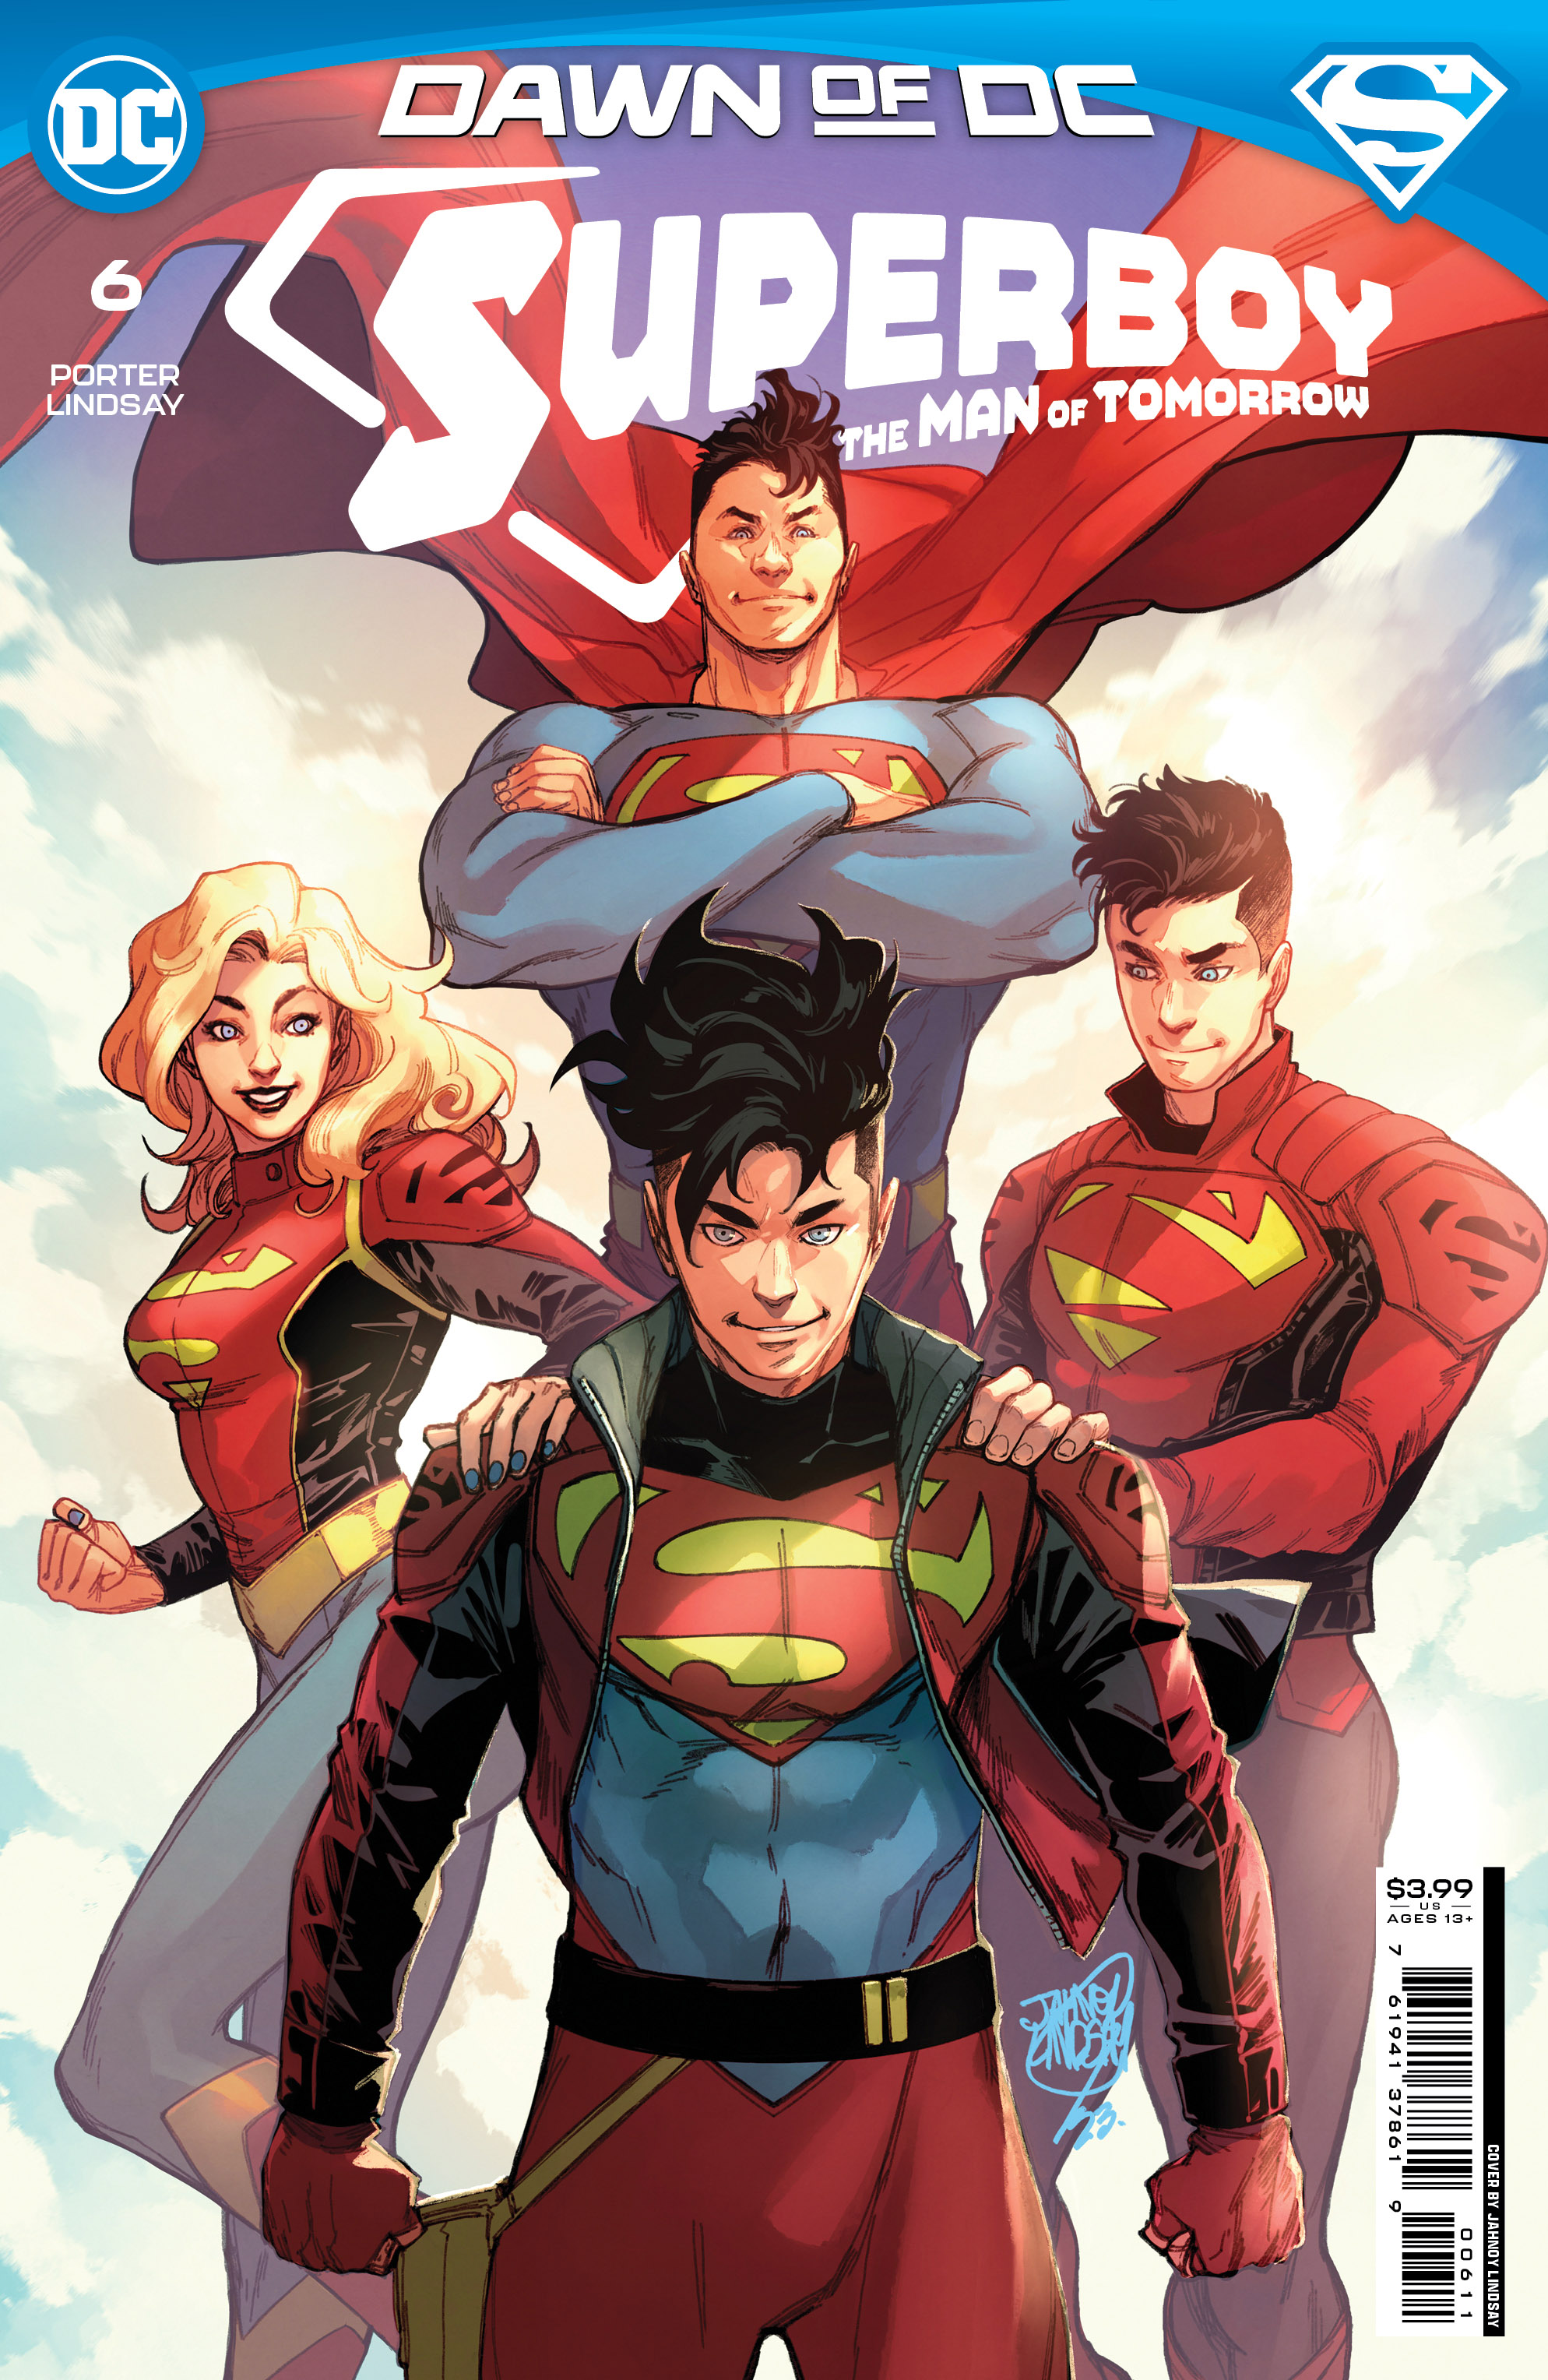 Superboy The Man of Tomorrow #6 Cover A Jahnoy Lindsay (Of 6)